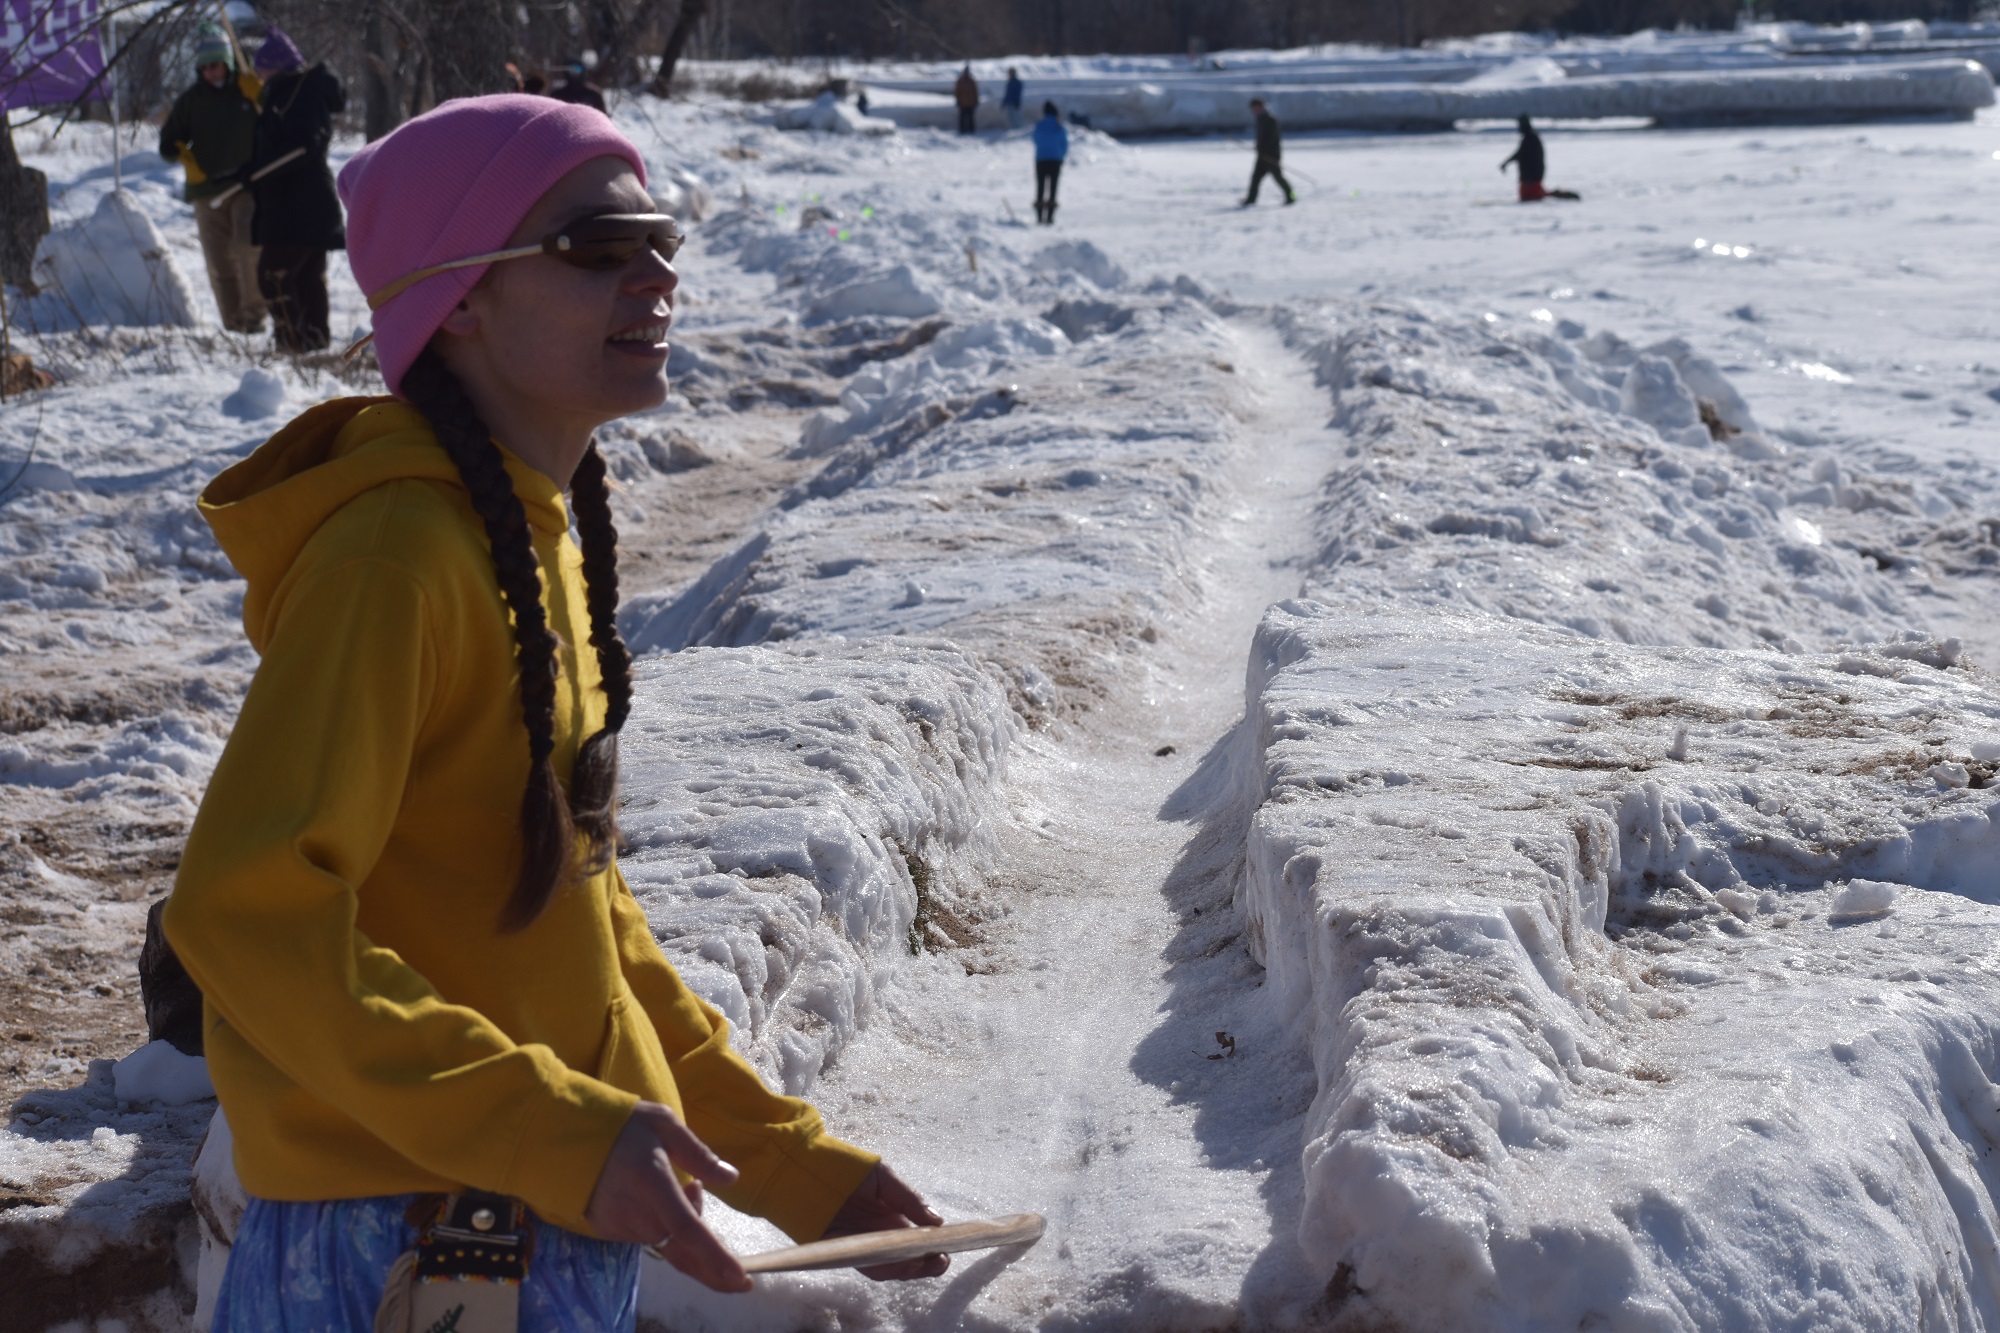 Red Cliff tribal member Sandy Gokee, who goes by the name Wenipashtaabe, clinched the longest throw for women 54 and under at 293.2 feet. She’s pictured wearing what she calls her “super sacred cedar vision” shades on Feb. 11, 2023. (Danielle Kaeding/WPR)